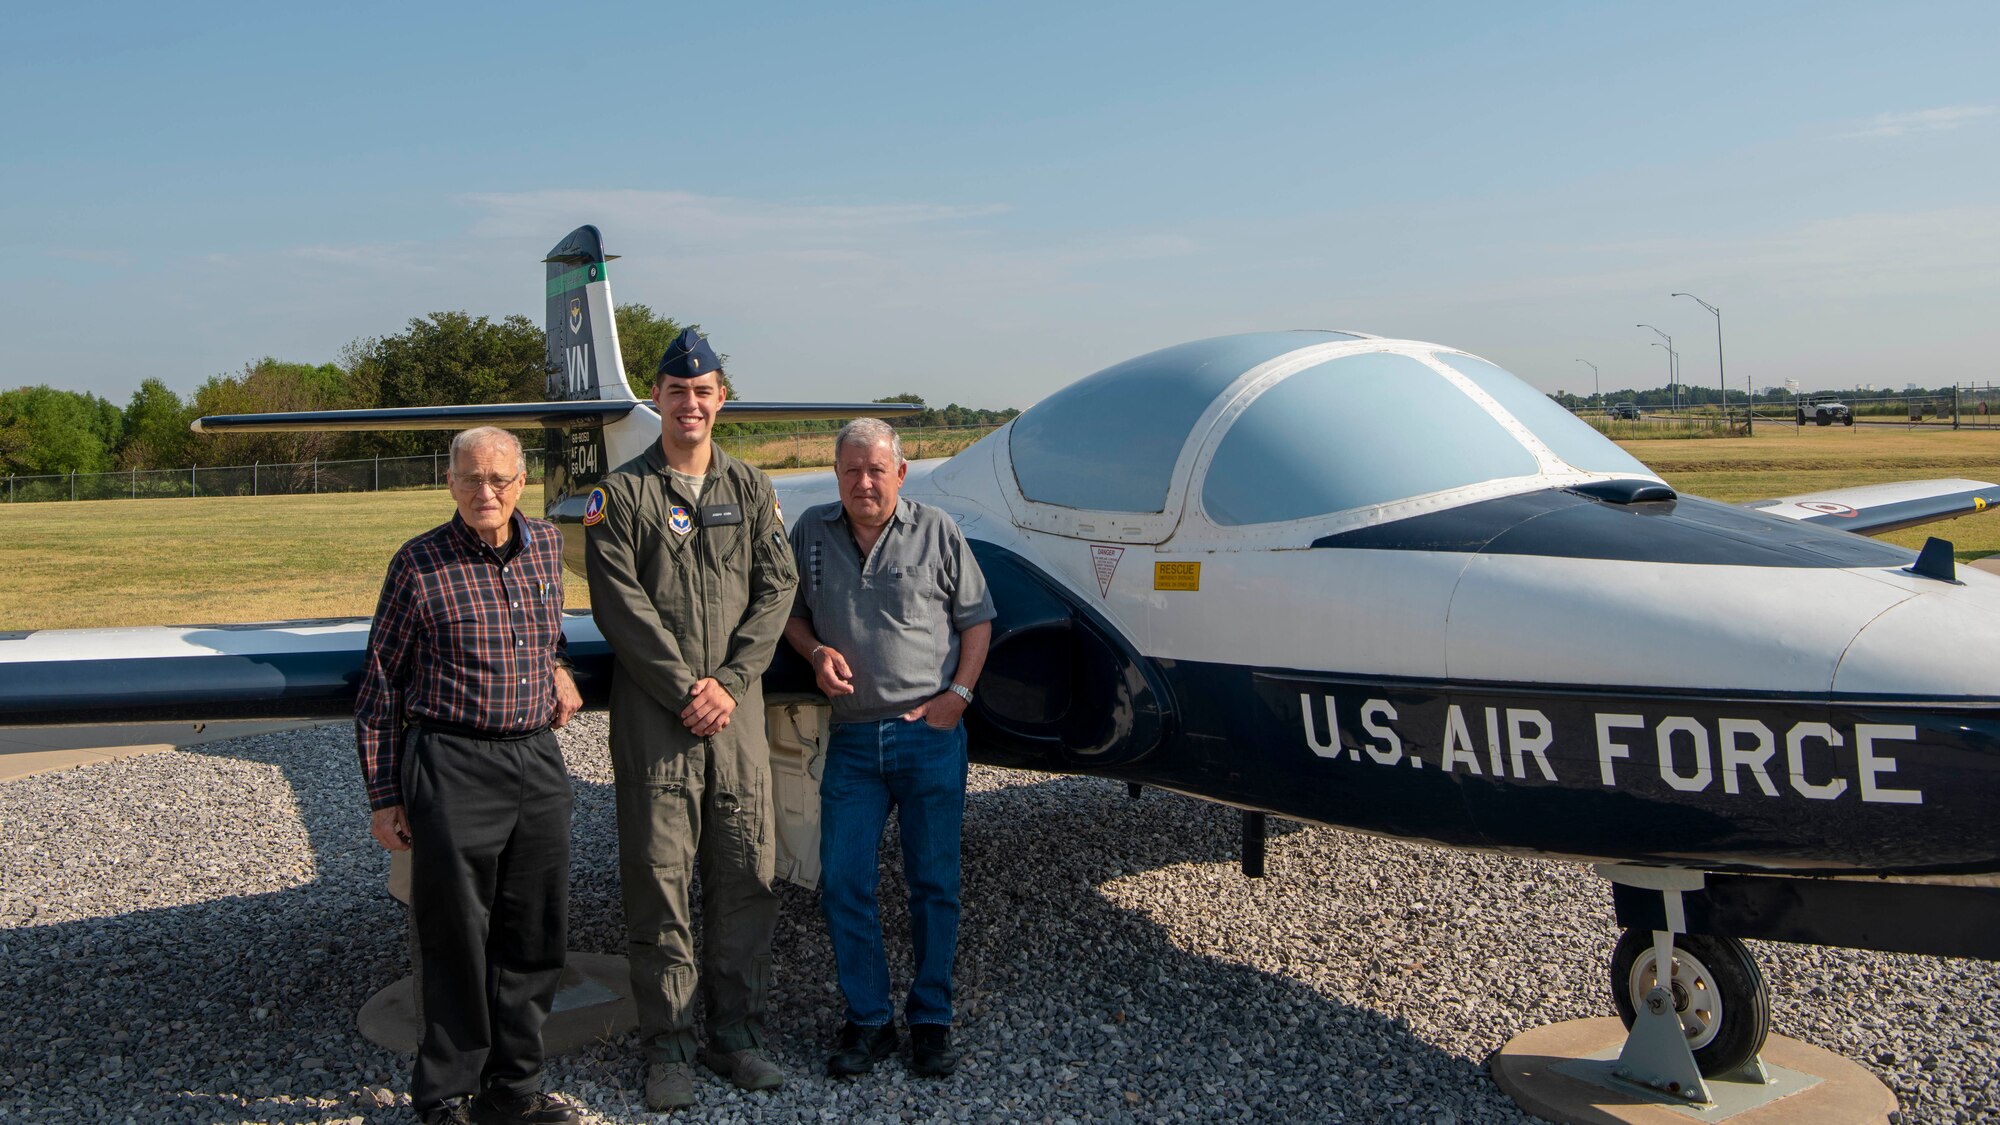 2nd Lt. Joe Stara, center, a student pilot currently assigned to the 71st Student Squadron, poses by a T-37 Tweet with retired Col. Jim Faulkner, left, and retired Lt. Col. Jim Mayhall, Aug. 6, at Vance Air Force Base, Okla. Faulkner and Mayhall were both student pilots at Vance AFB in the late 1960s. (U.S. Air Force photo by Airman 1st Class Octavius Thompson)